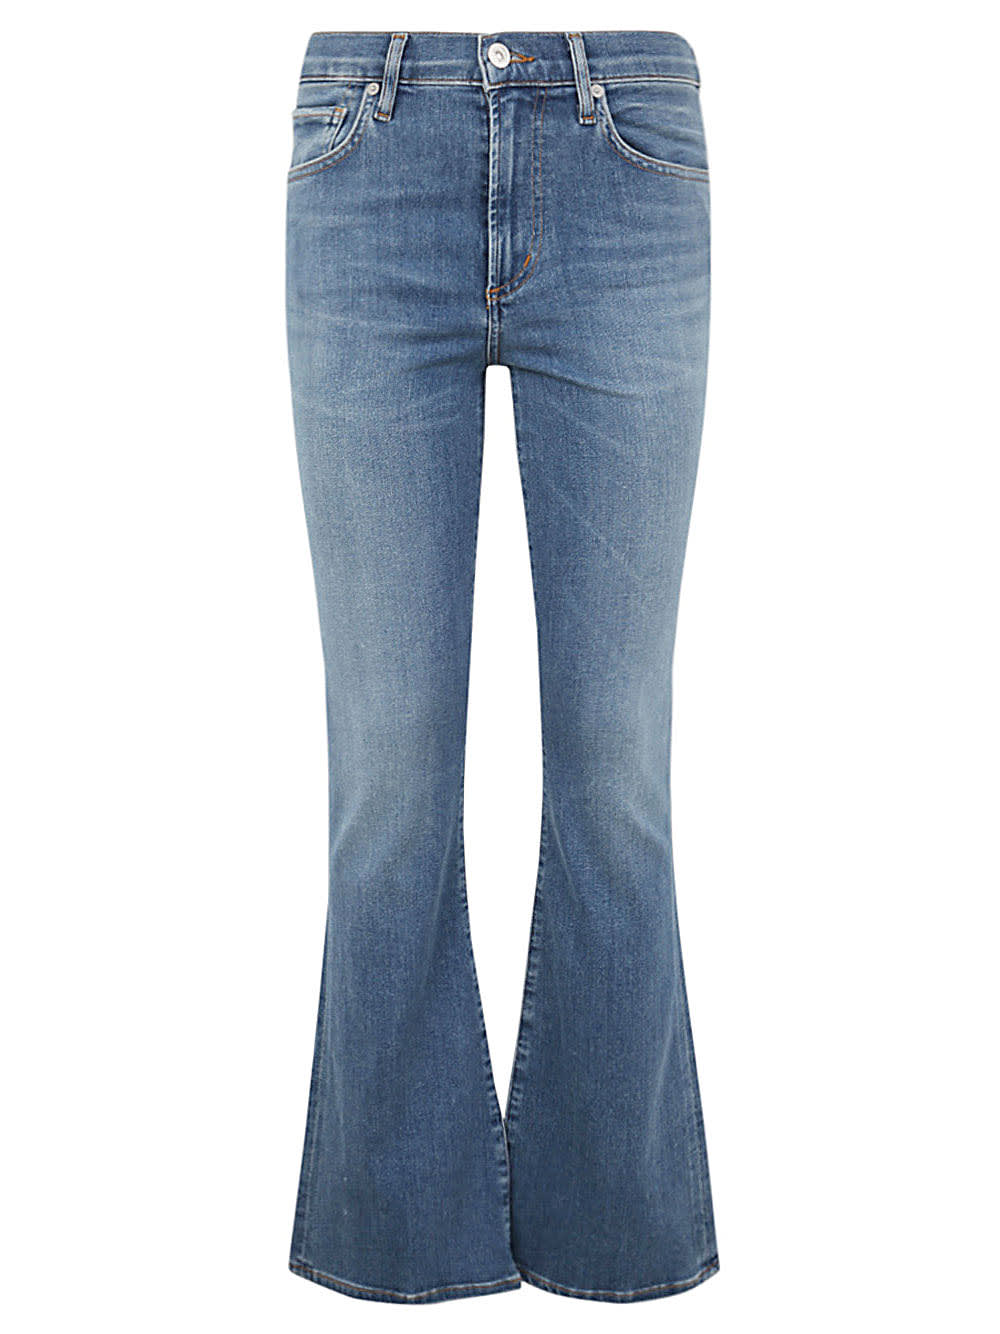 Citizens of Humanity Emannuell Jeans